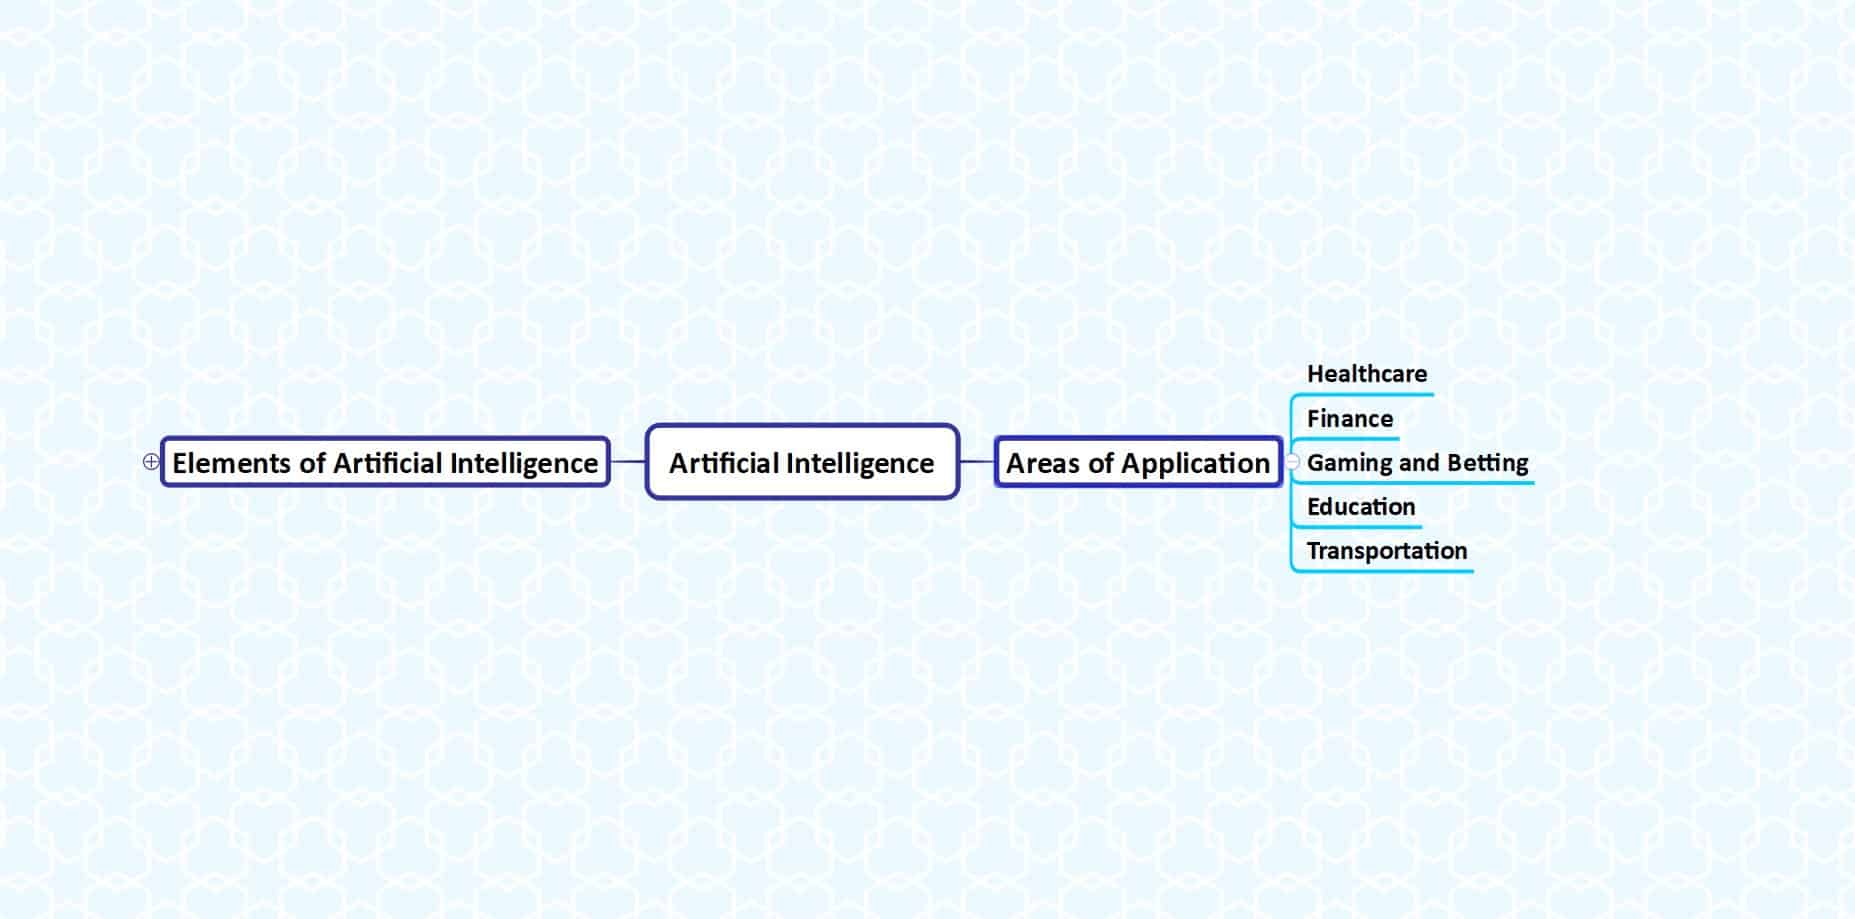 Artificial Intelligence Areas